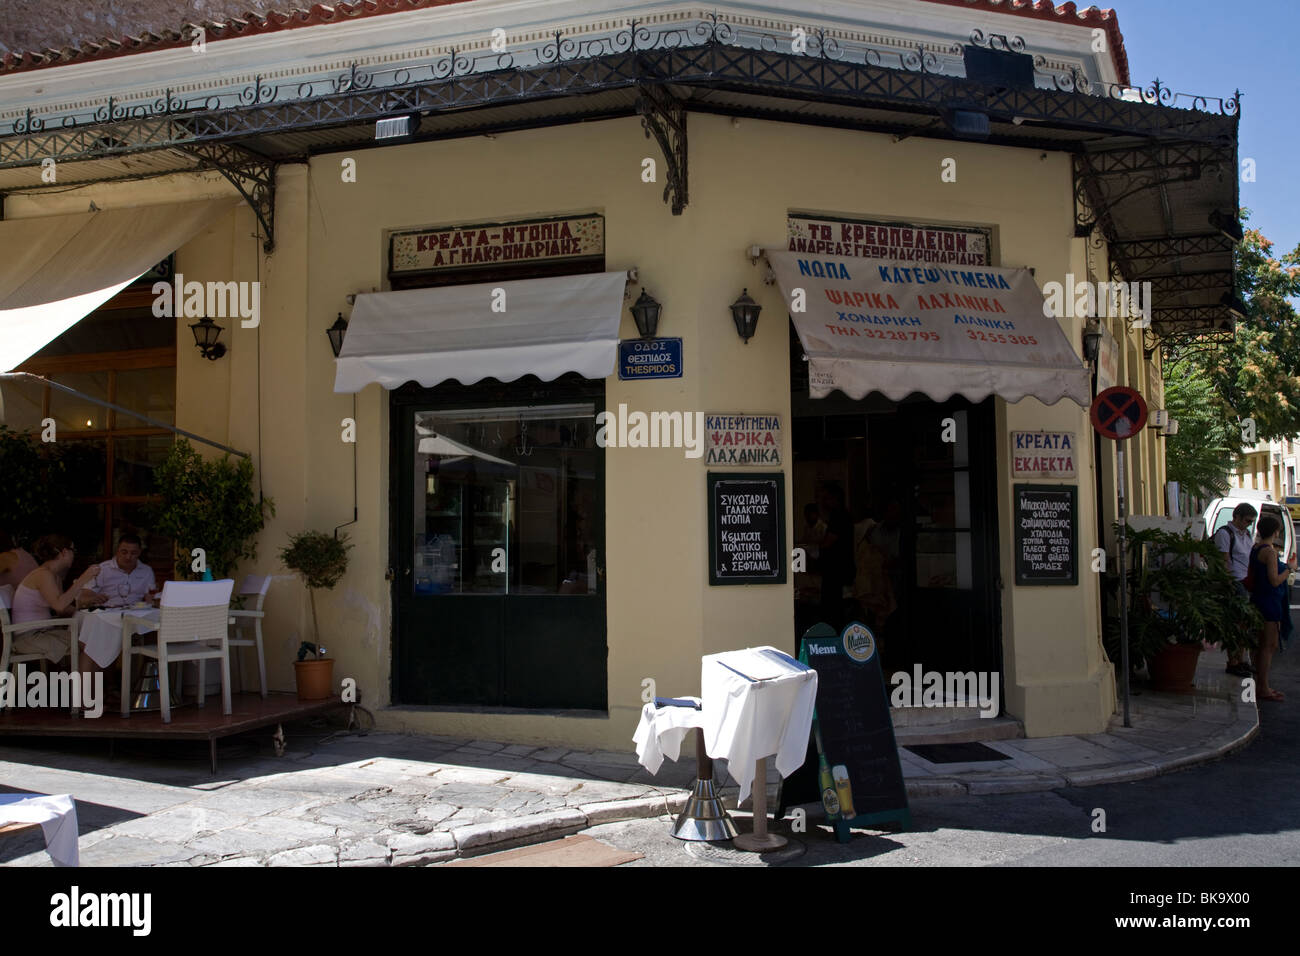 Page 3 - Plaka Athens Restaurant High Resolution Stock Photography and  Images - Alamy